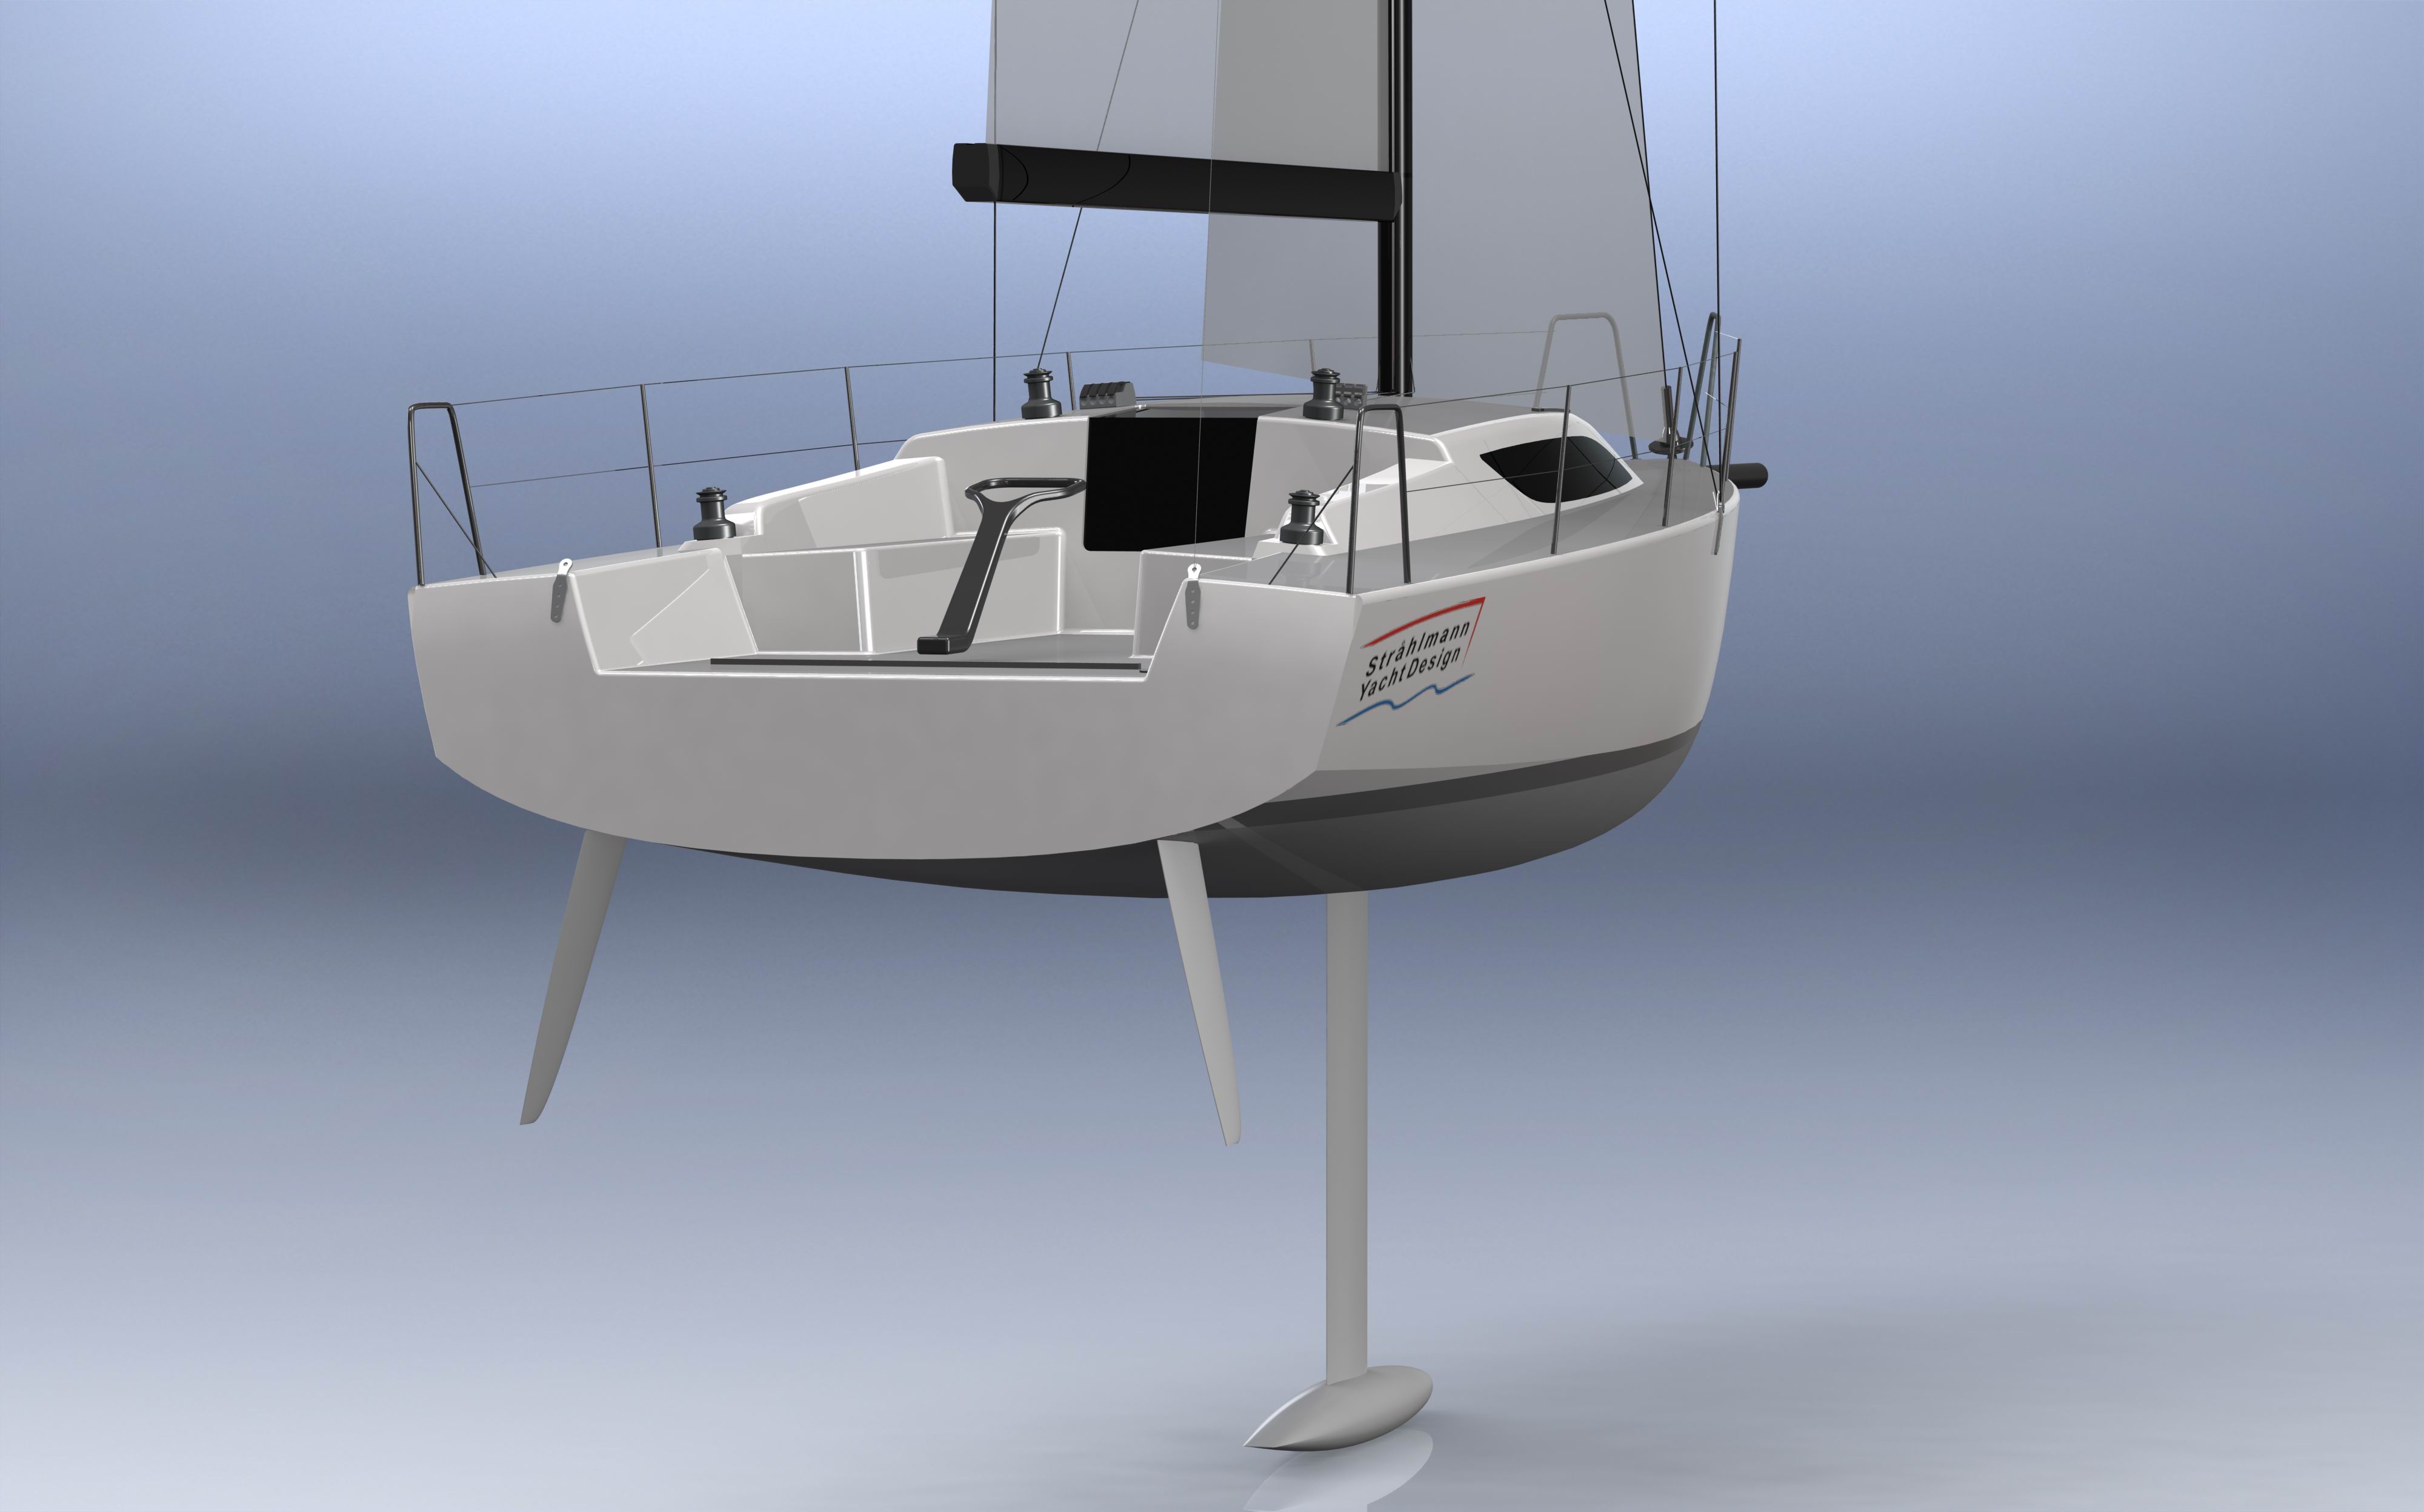 The new exiting and fast sailboat"